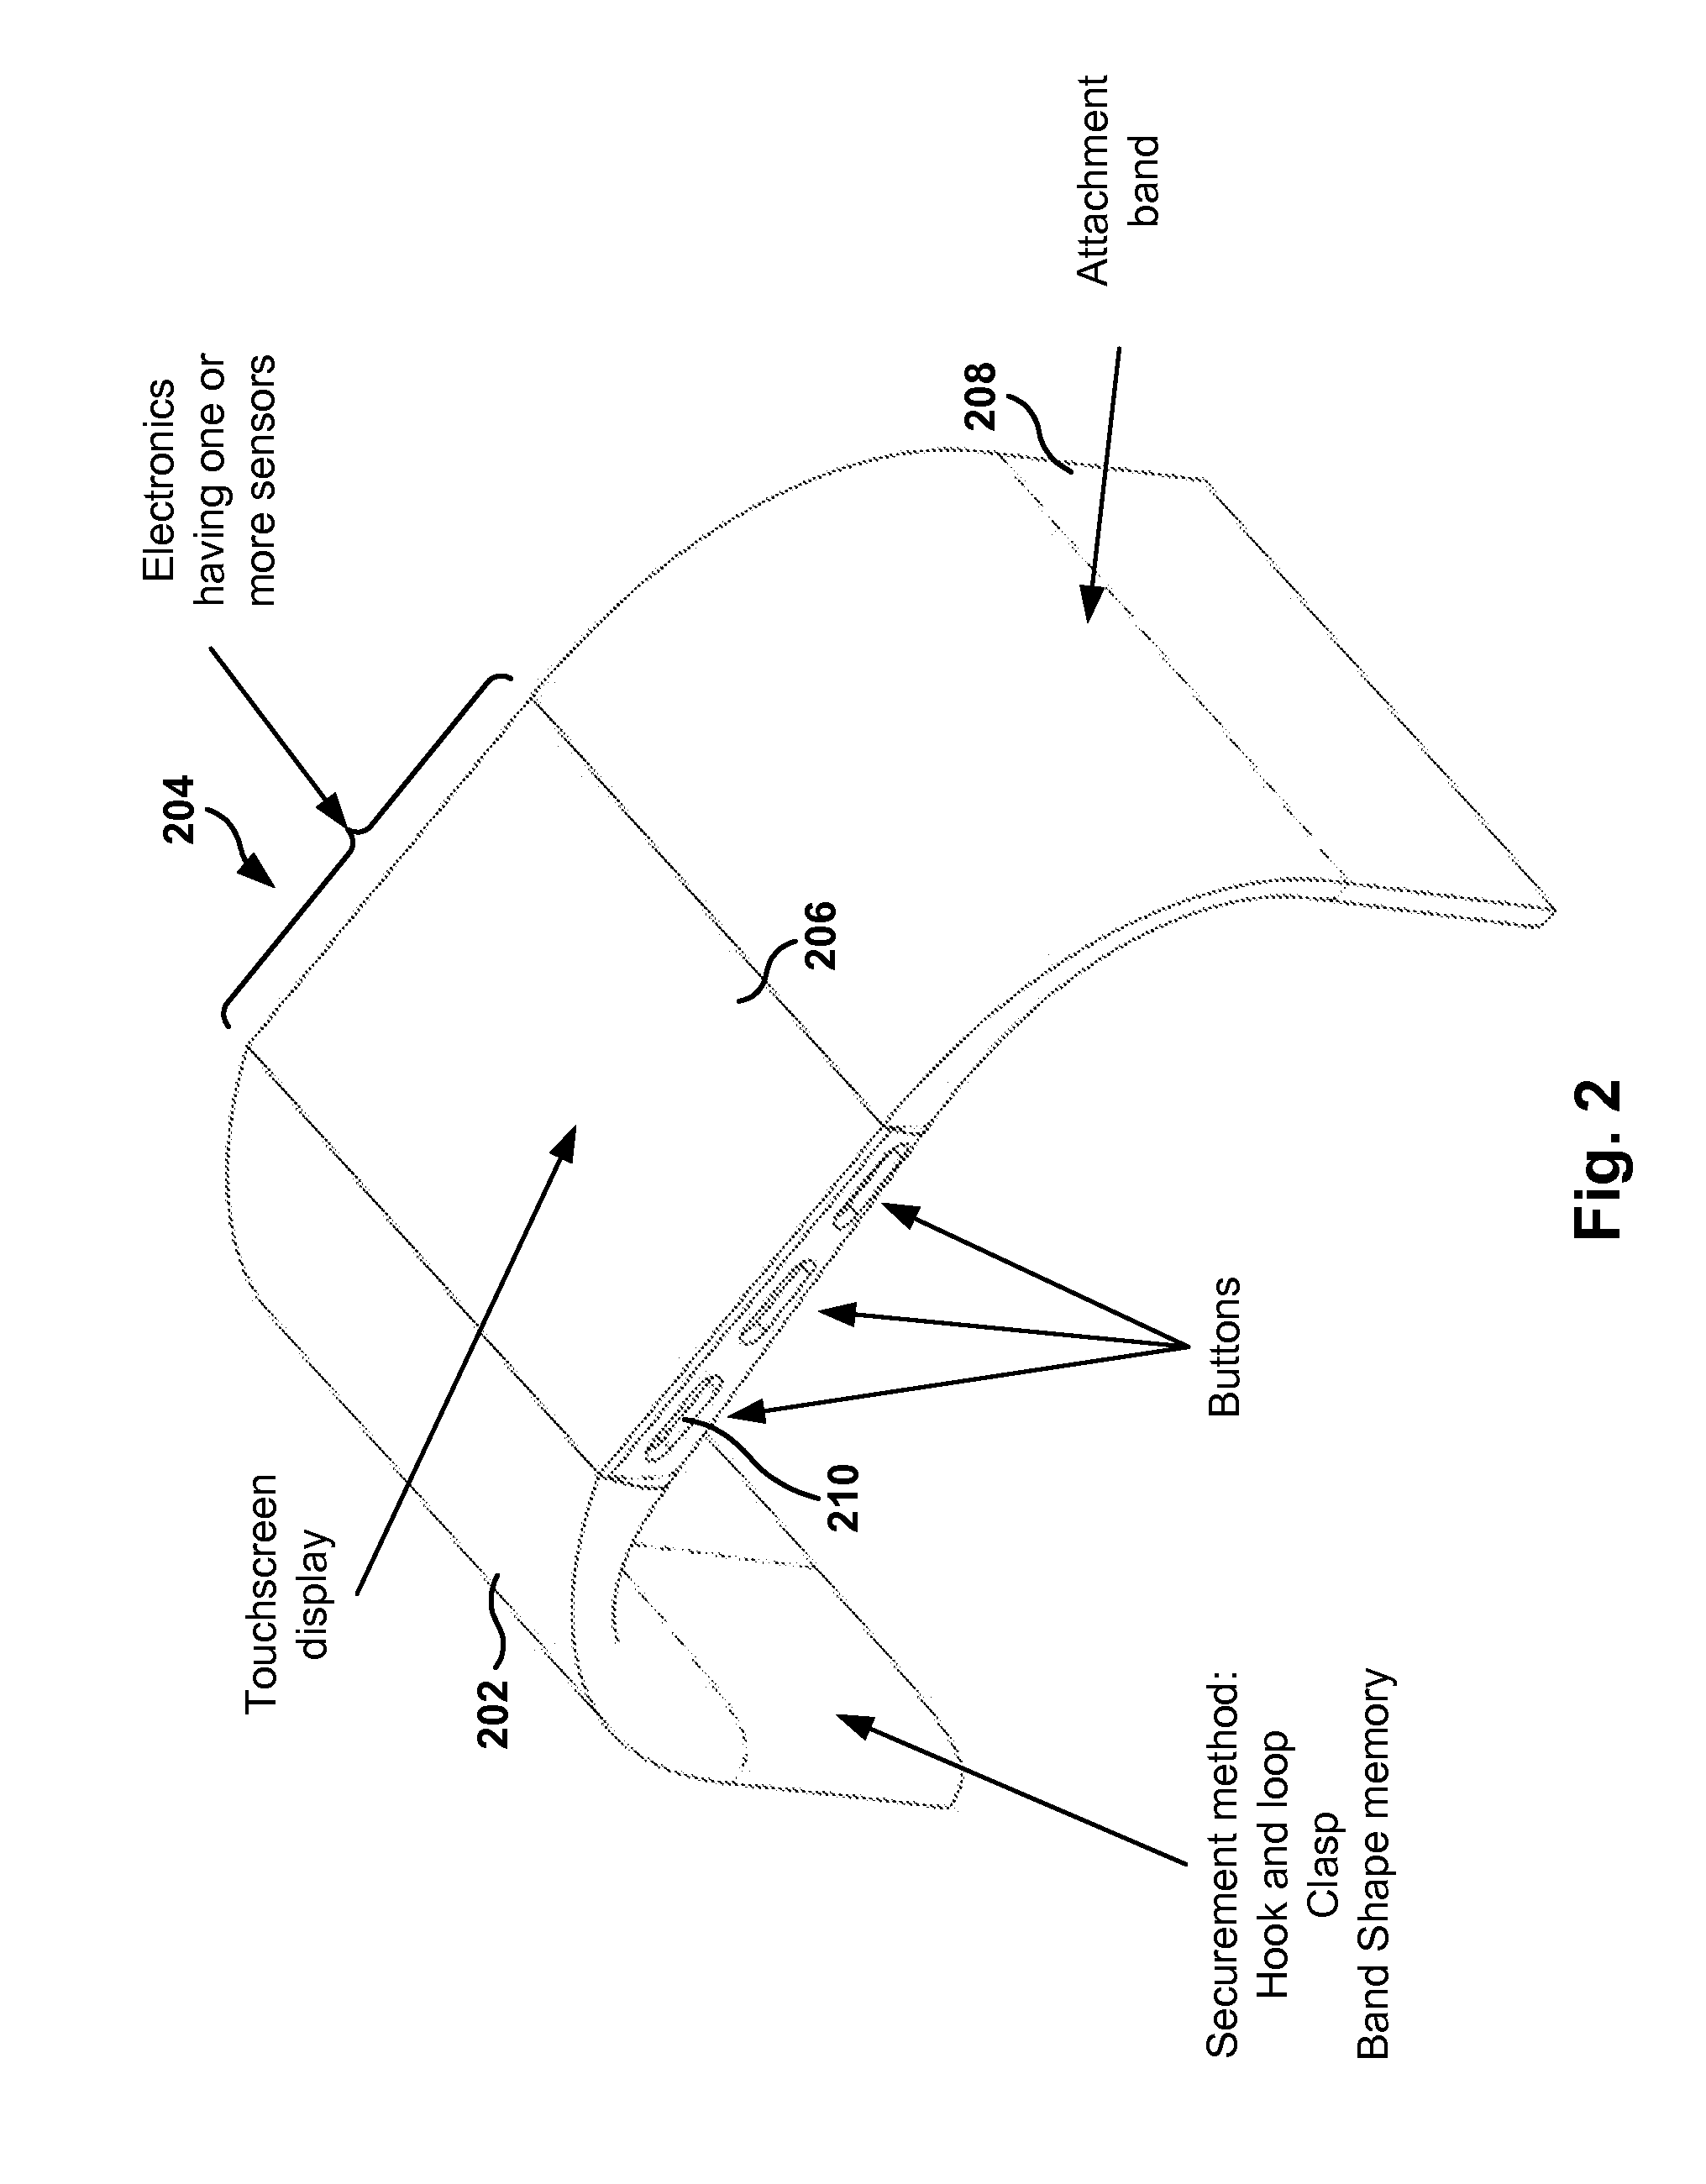 Power consumption management of display in portable device based on prediction of user input